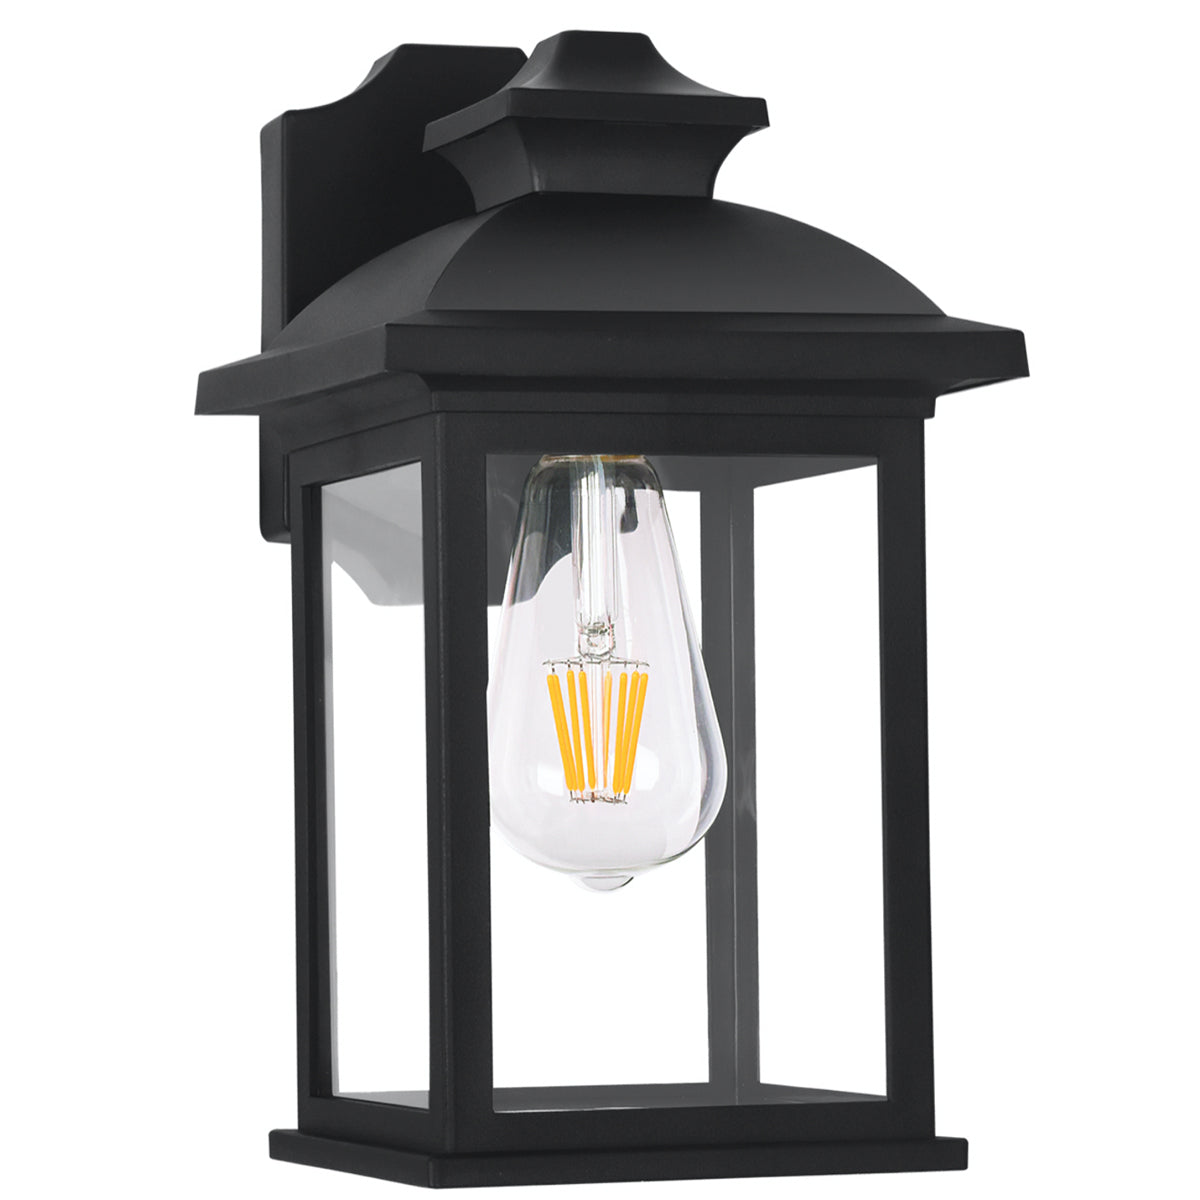 Our industrial style outdoor light is made from a high-quality polycarbonate body which is weather and rust proof and is complete with polycarbonate clear windows. Easy to install, and also suitable for installation inside. Designed for longevity and to withstand the toughest of weather conditions, this item is popular for coastal areas.